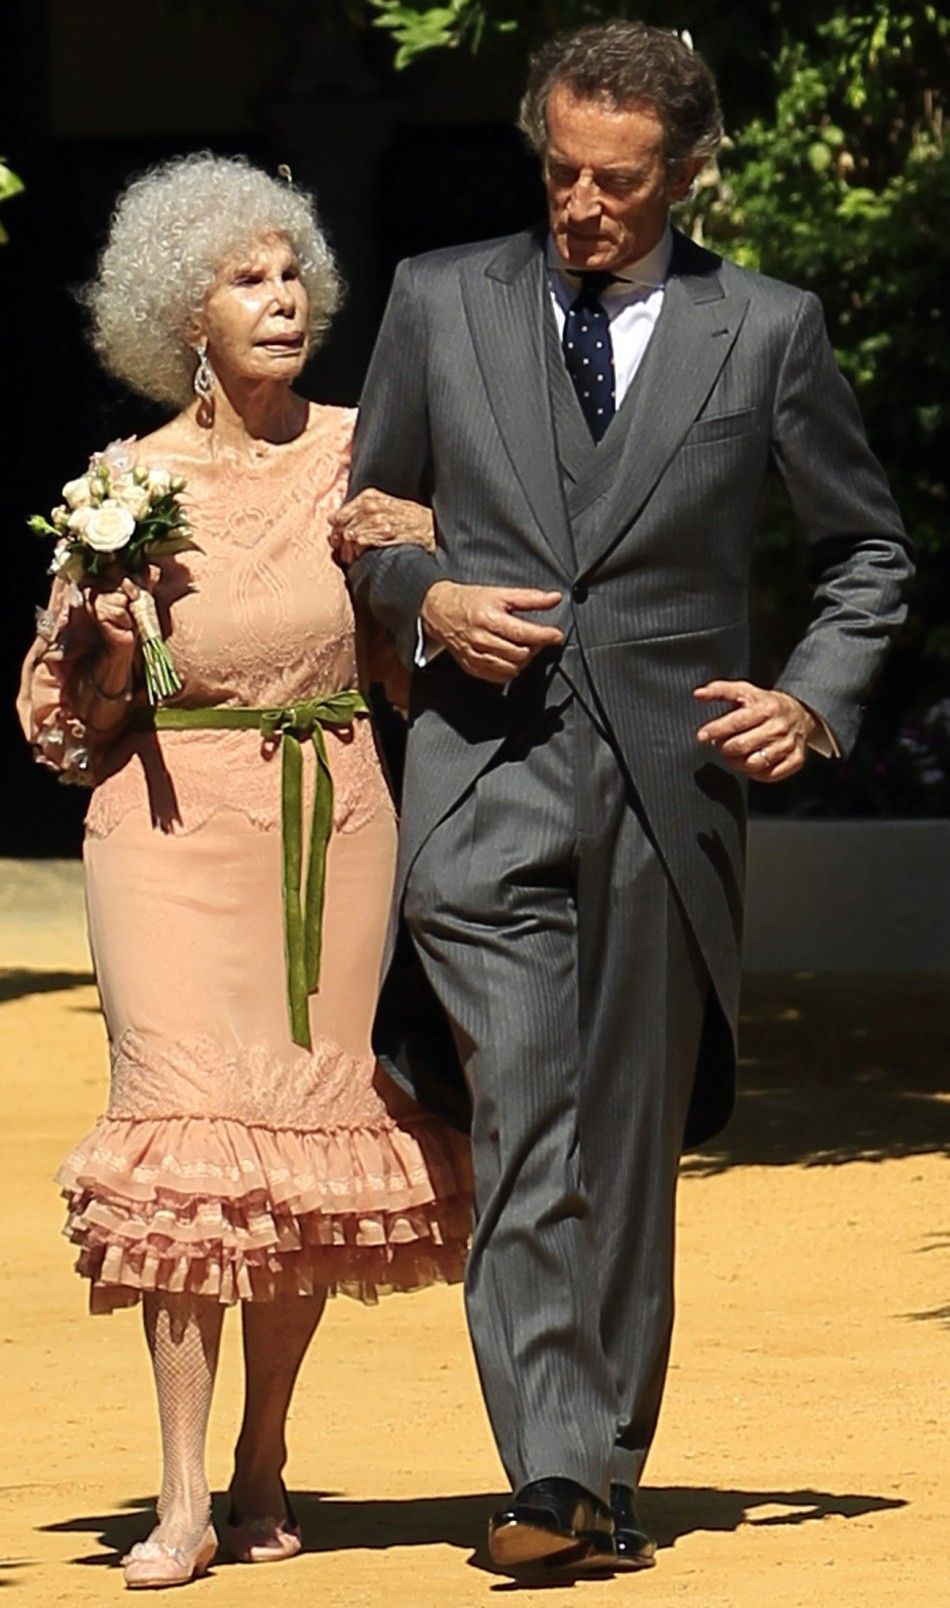 Spains Duchess of Alba Cayetana Fitz-James Stuart y Silva L and her husband Alfonso Diez walk inside Las Duenas Palace after their wedding in Seville